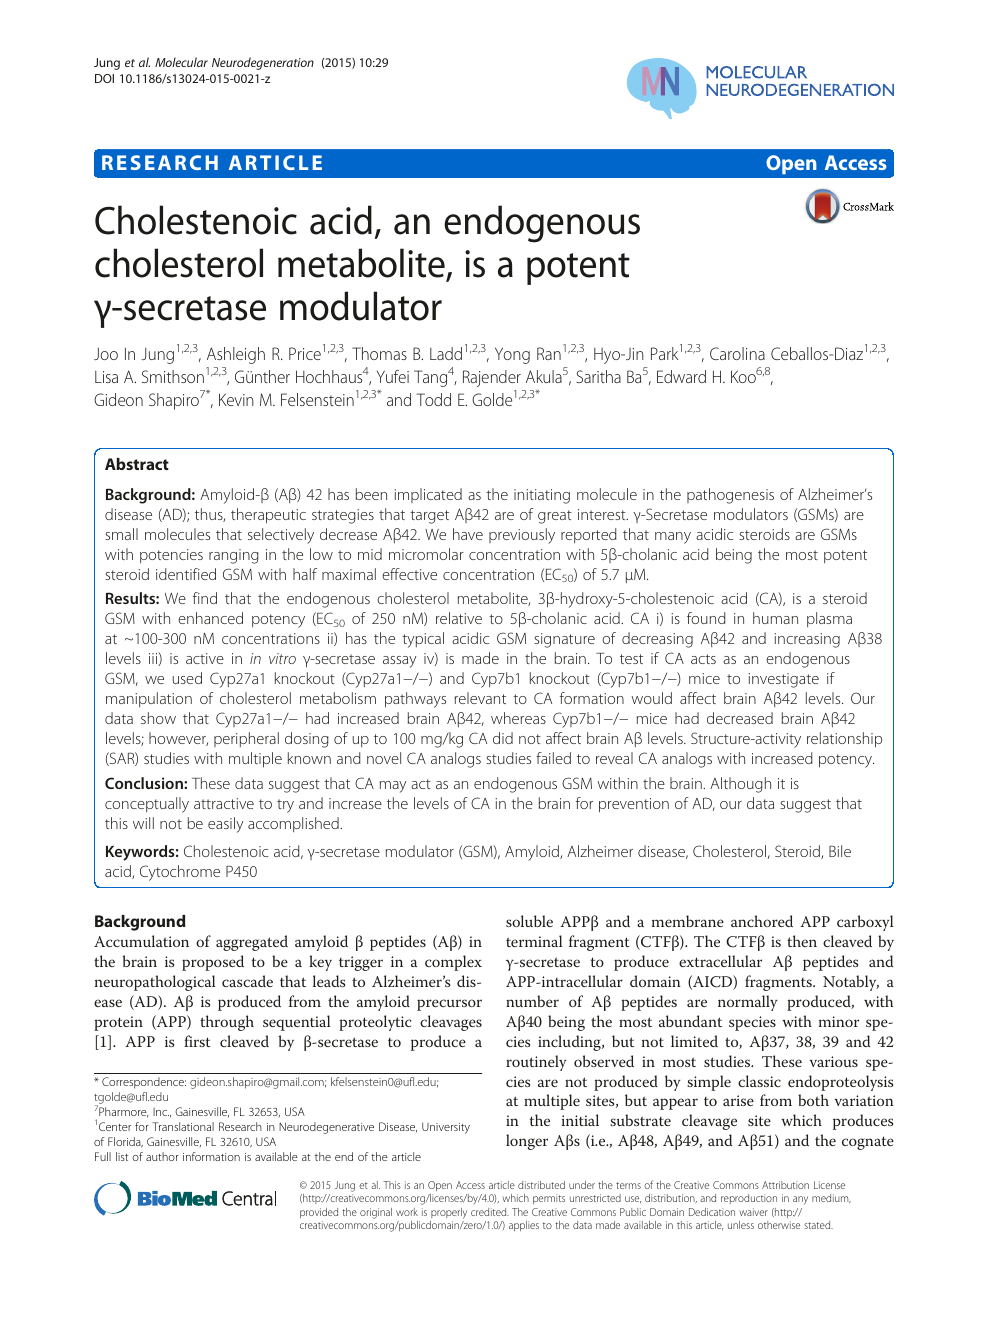 Cholestenoic Acid An Endogenous Cholesterol Metabolite Is A Potent G Secretase Modulator Topic Of Research Paper In Biological Sciences Download Scholarly Article Pdf And Read For Free On Cyberleninka Open Science Hub